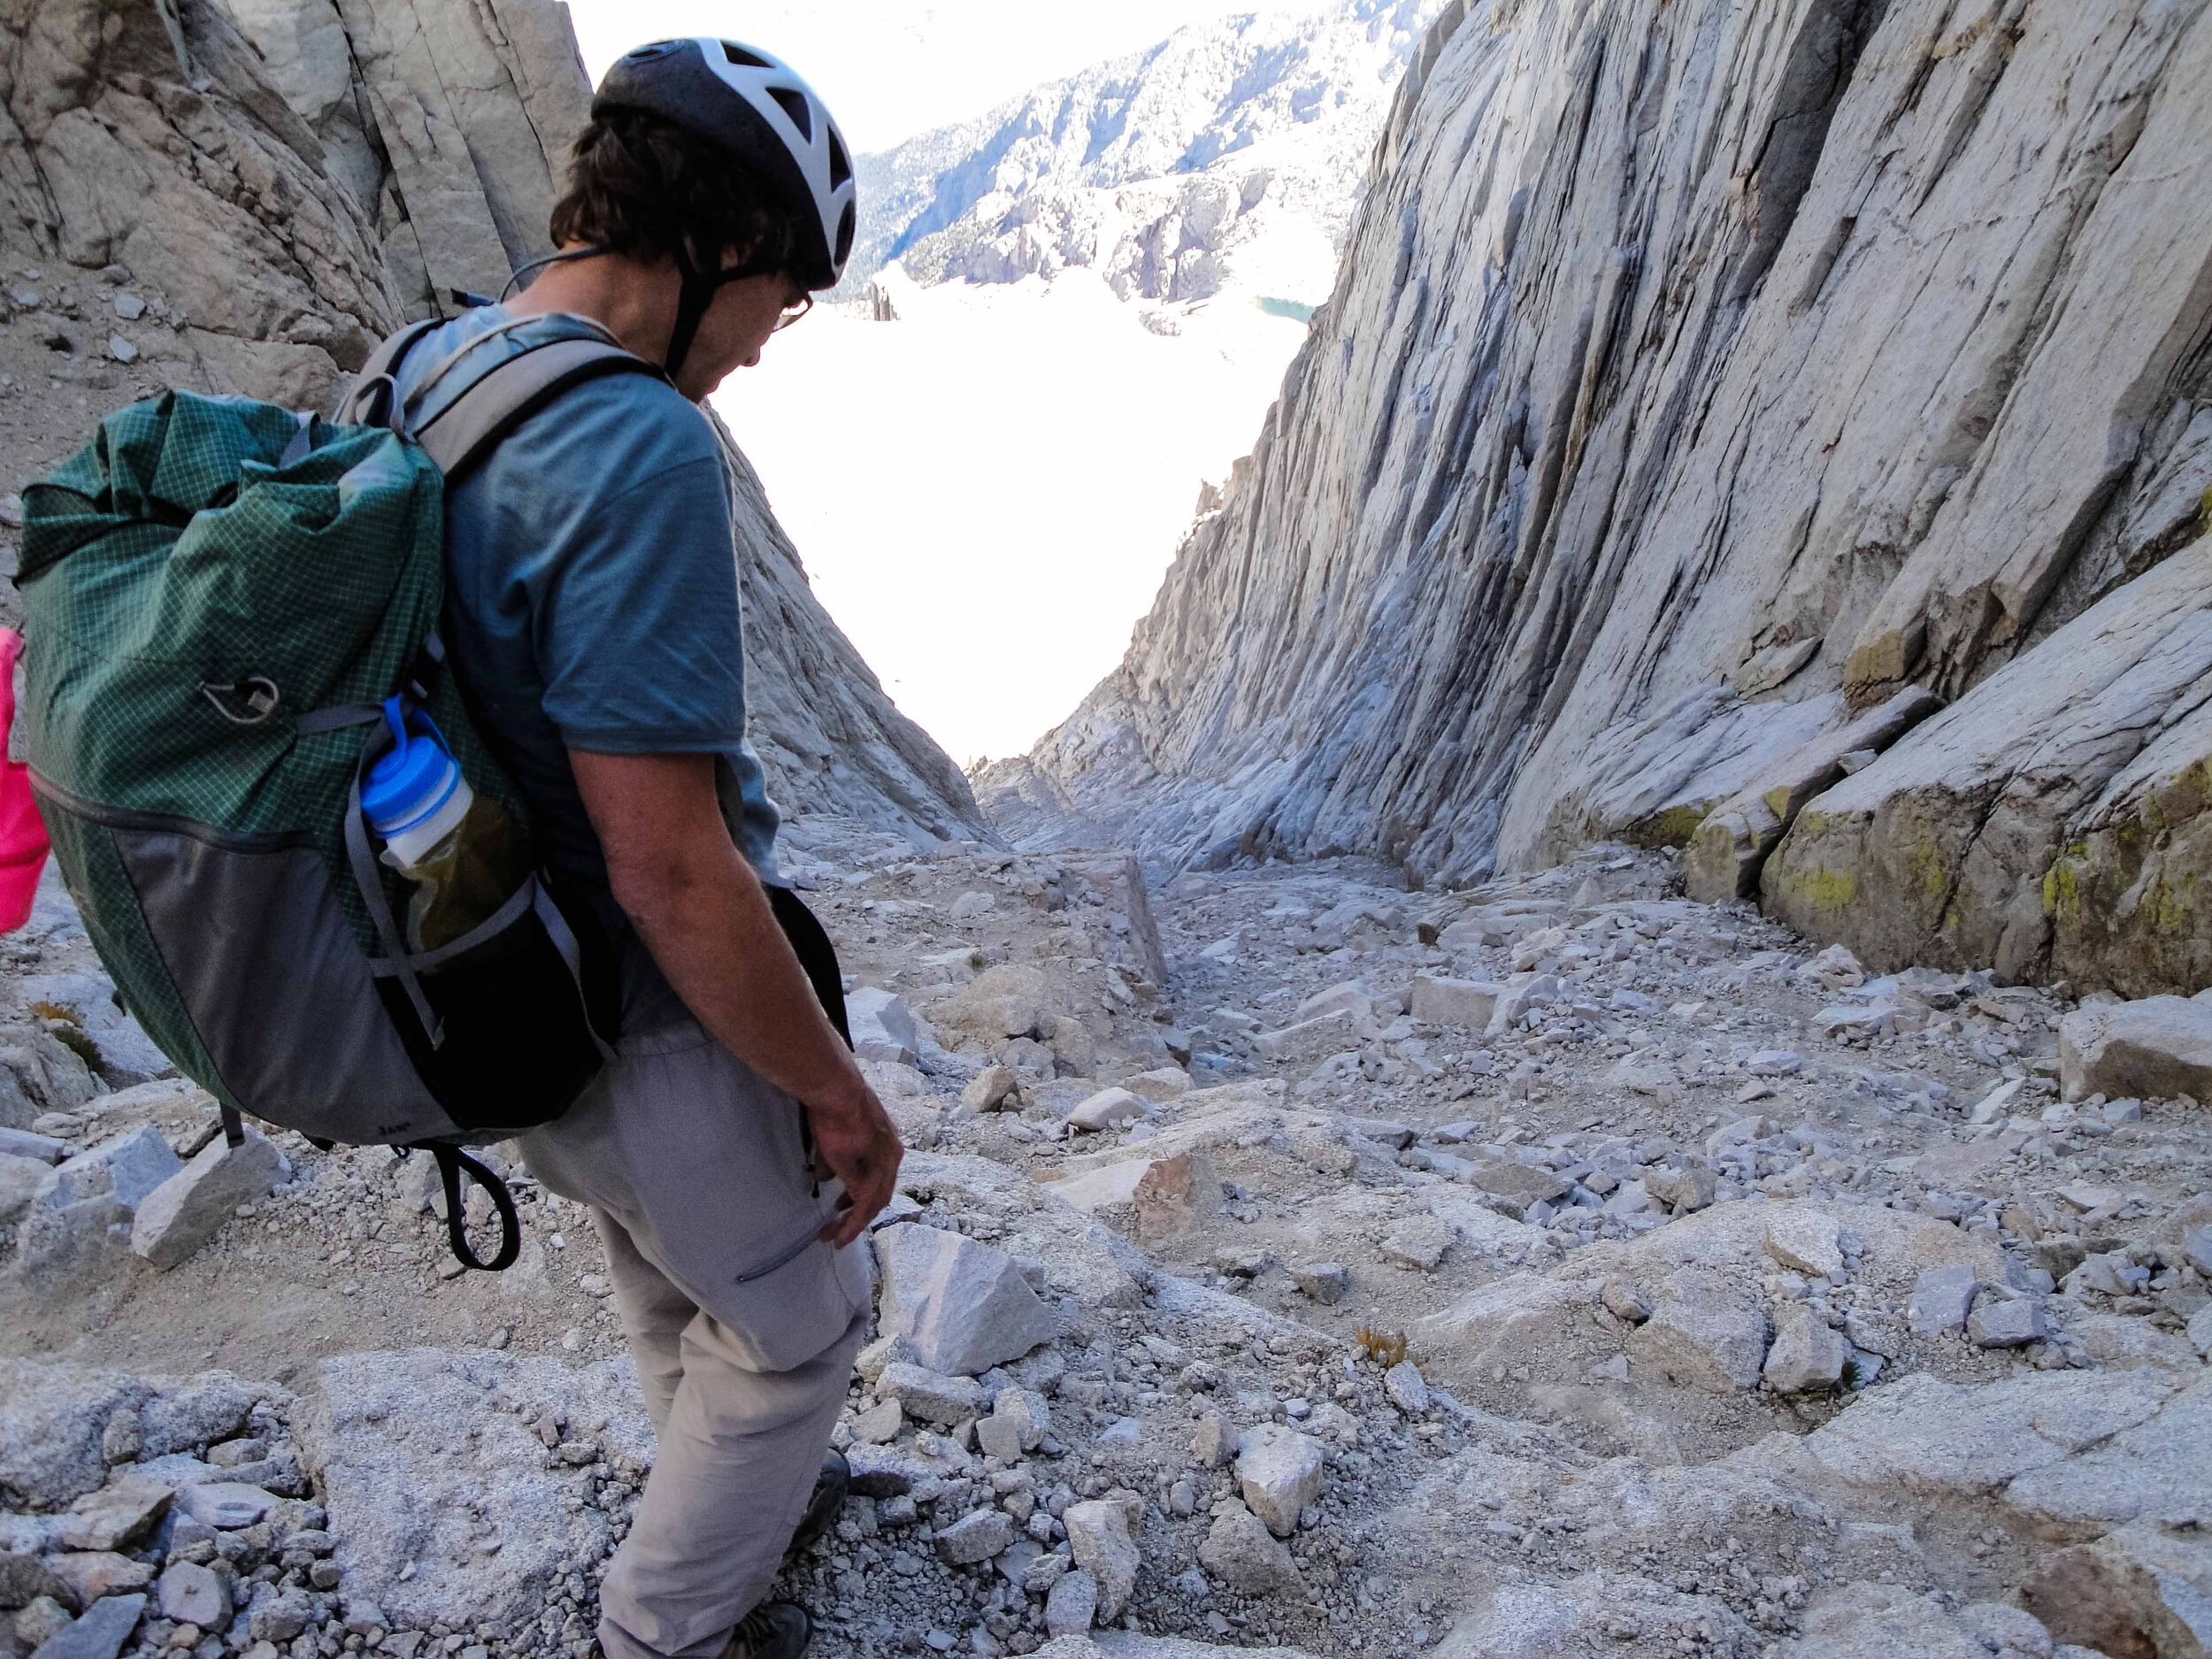 Looking down the mountaineer's route on Mt. Whitney